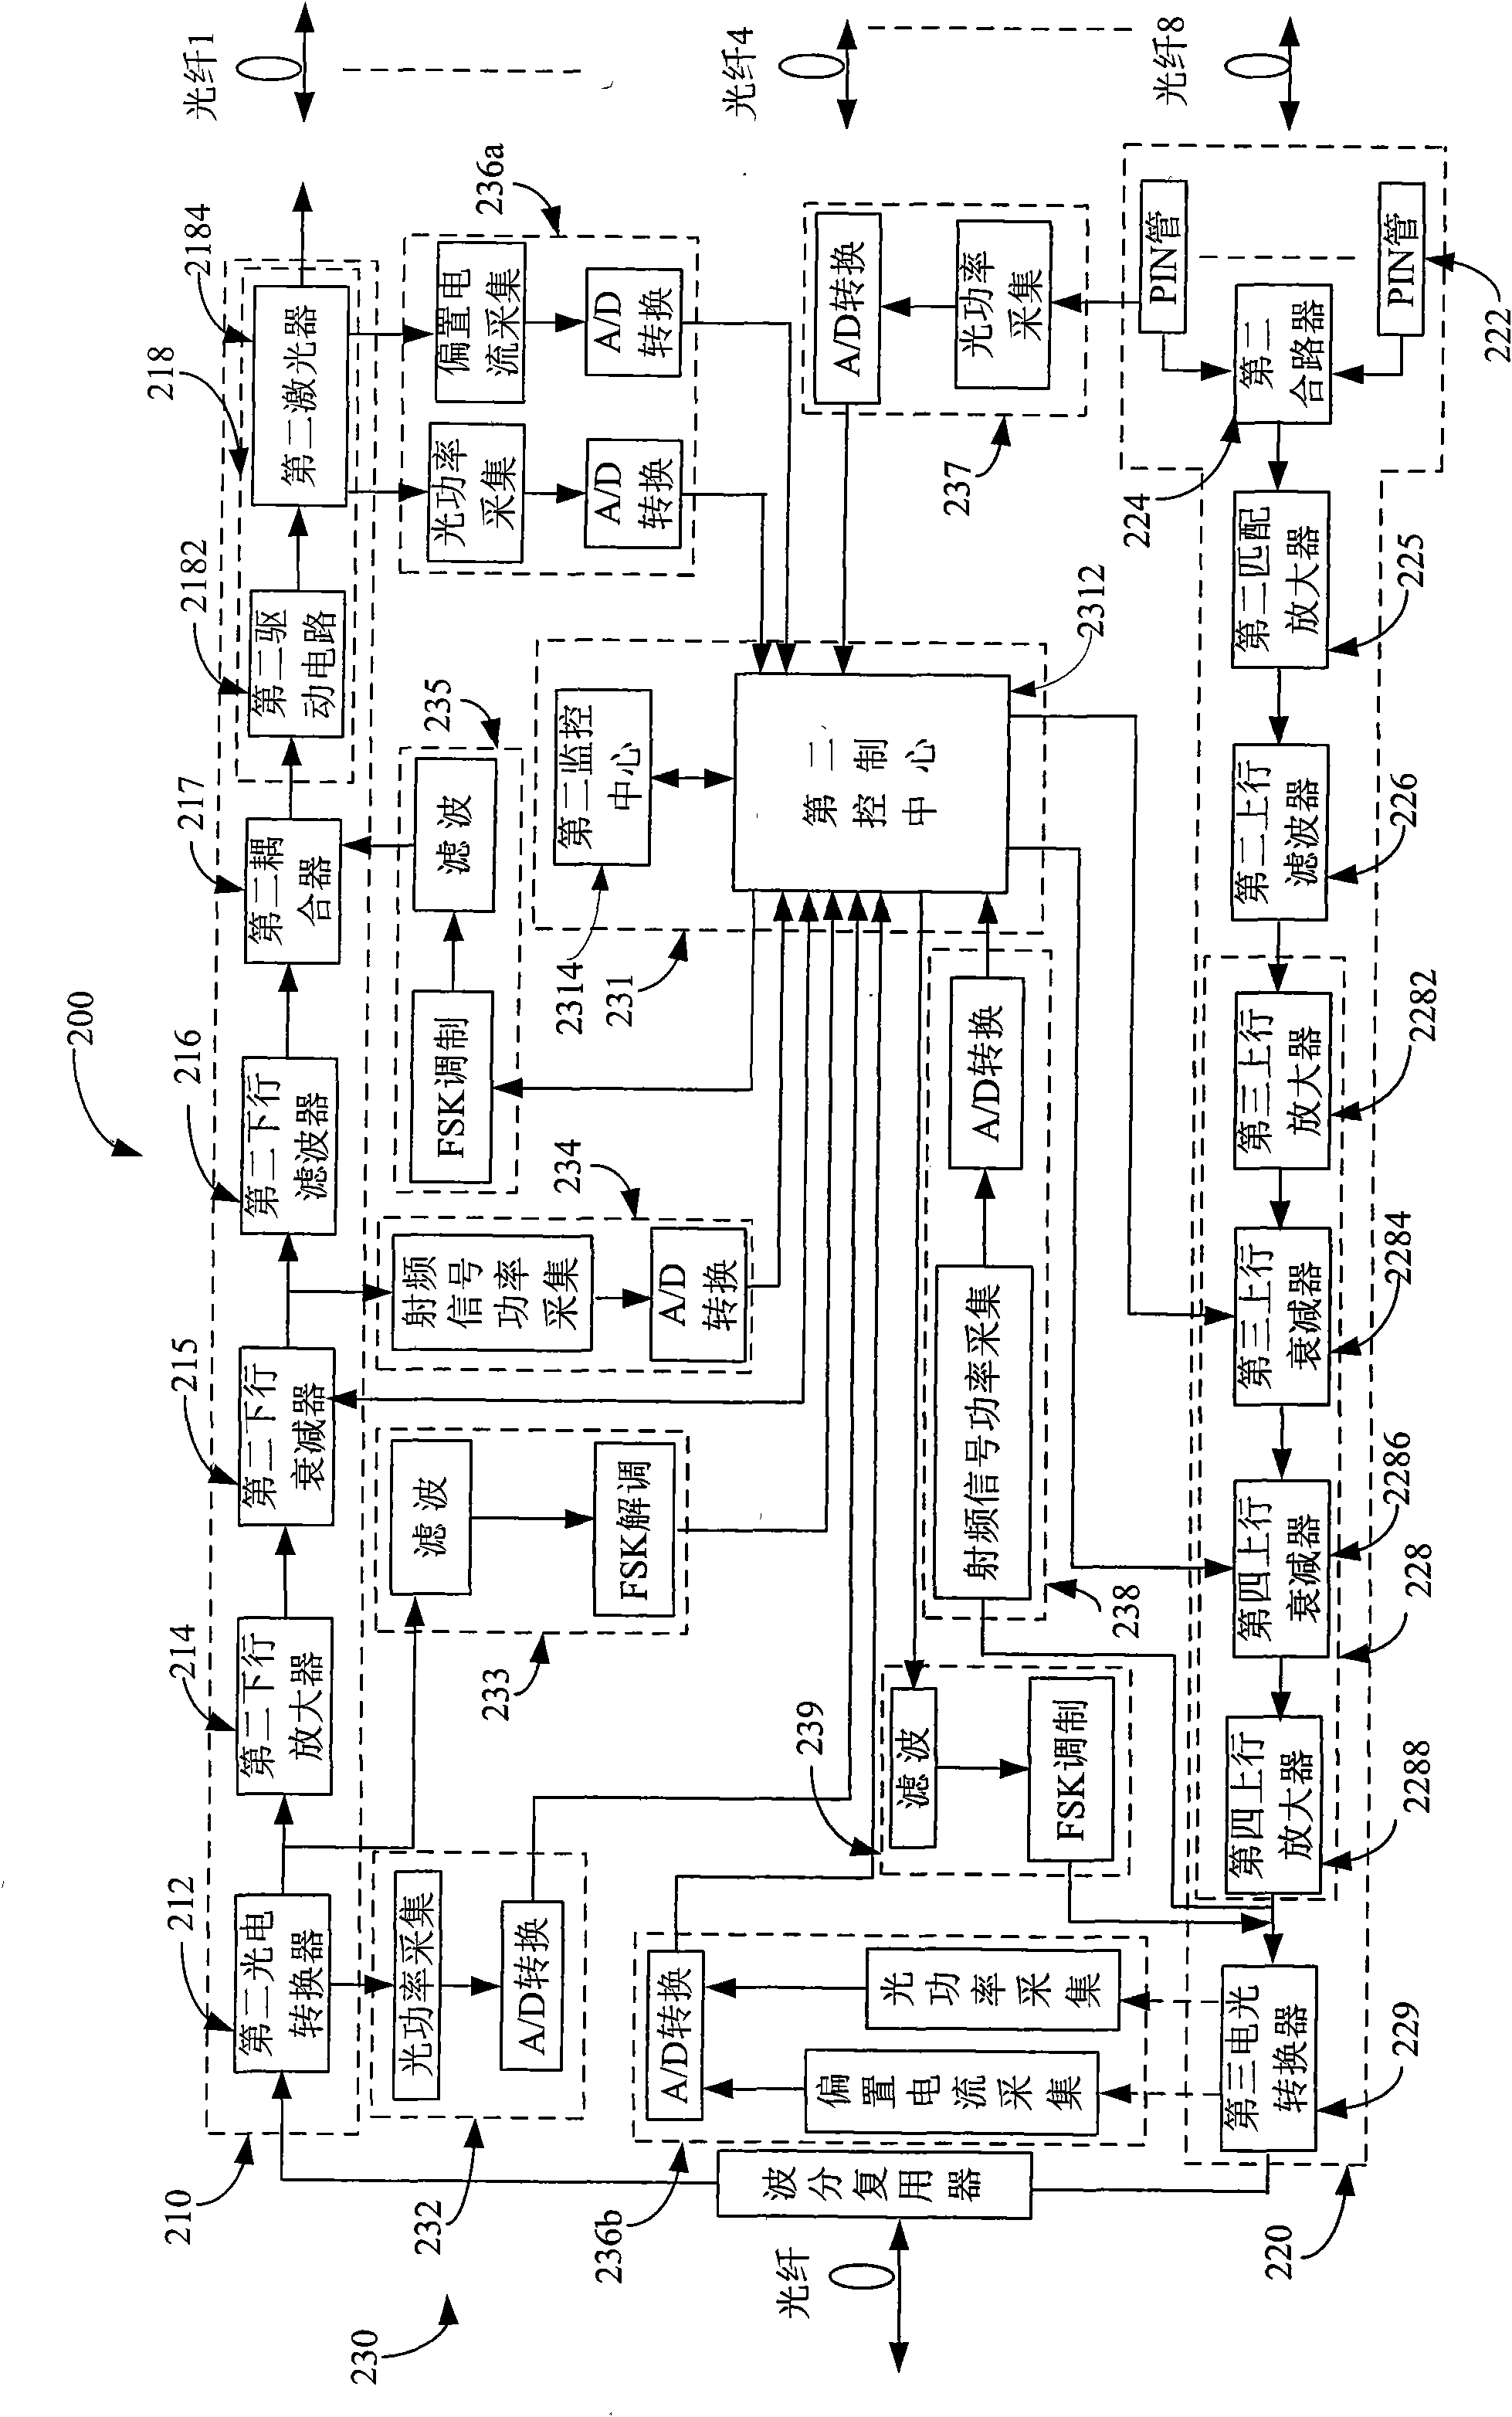 Fiber access system and method of wireless signal based on tri-network integration